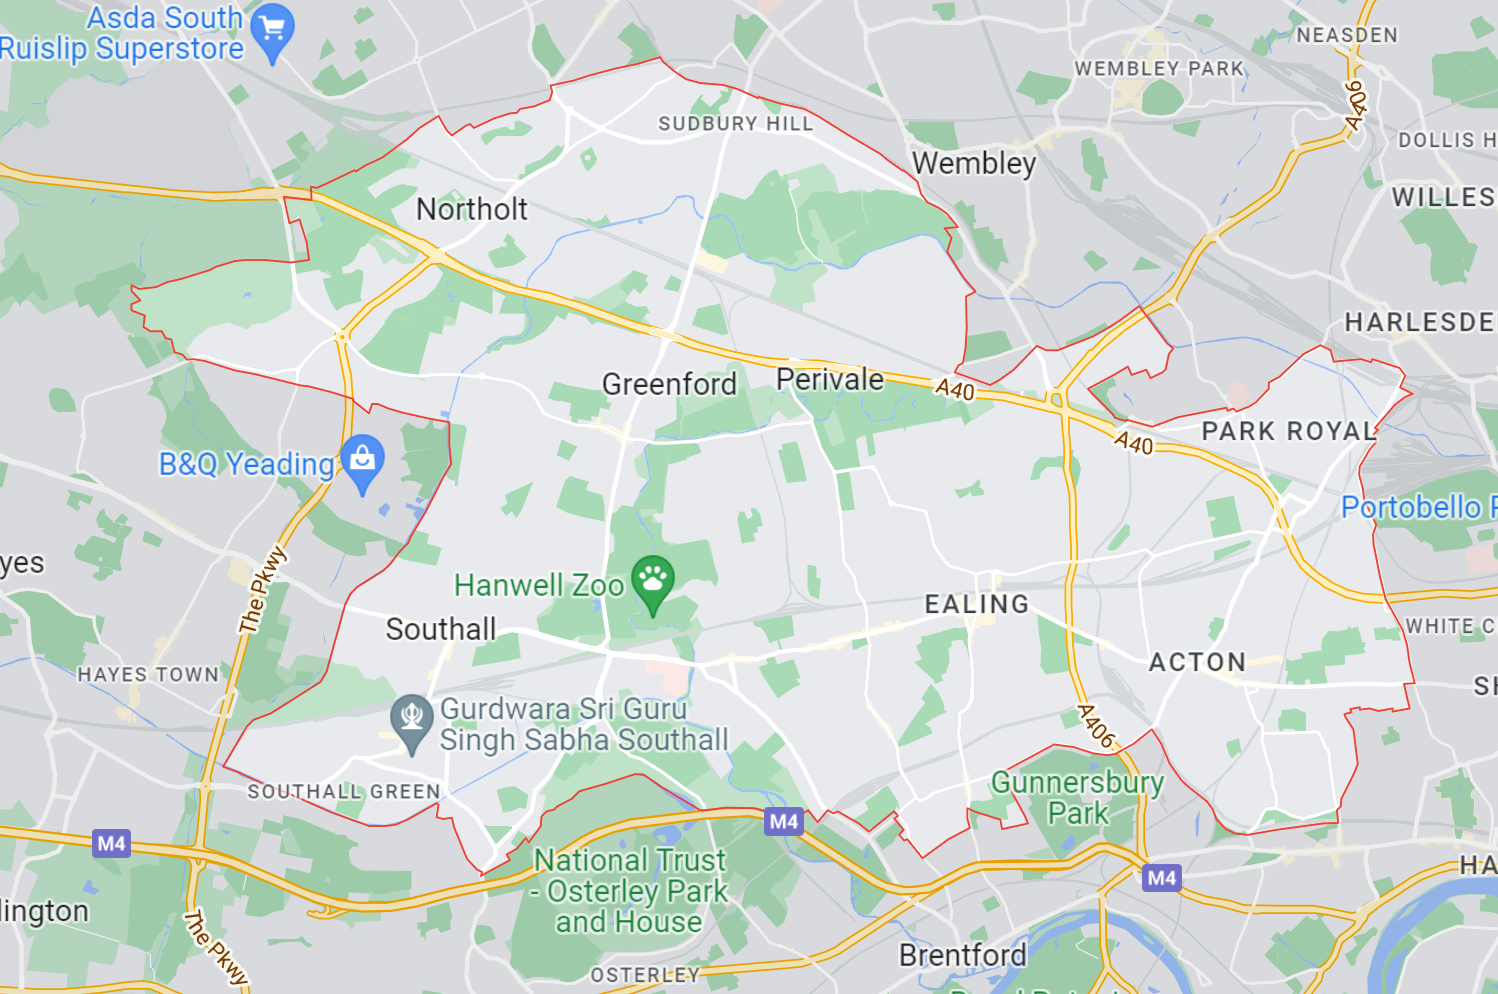 Map of Healthwatch Ealing area